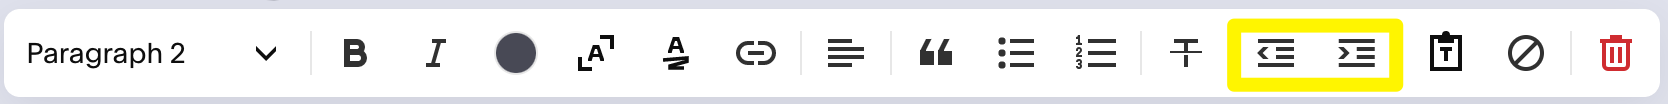 Indent_icon_Squarespace_text_toolbar.png